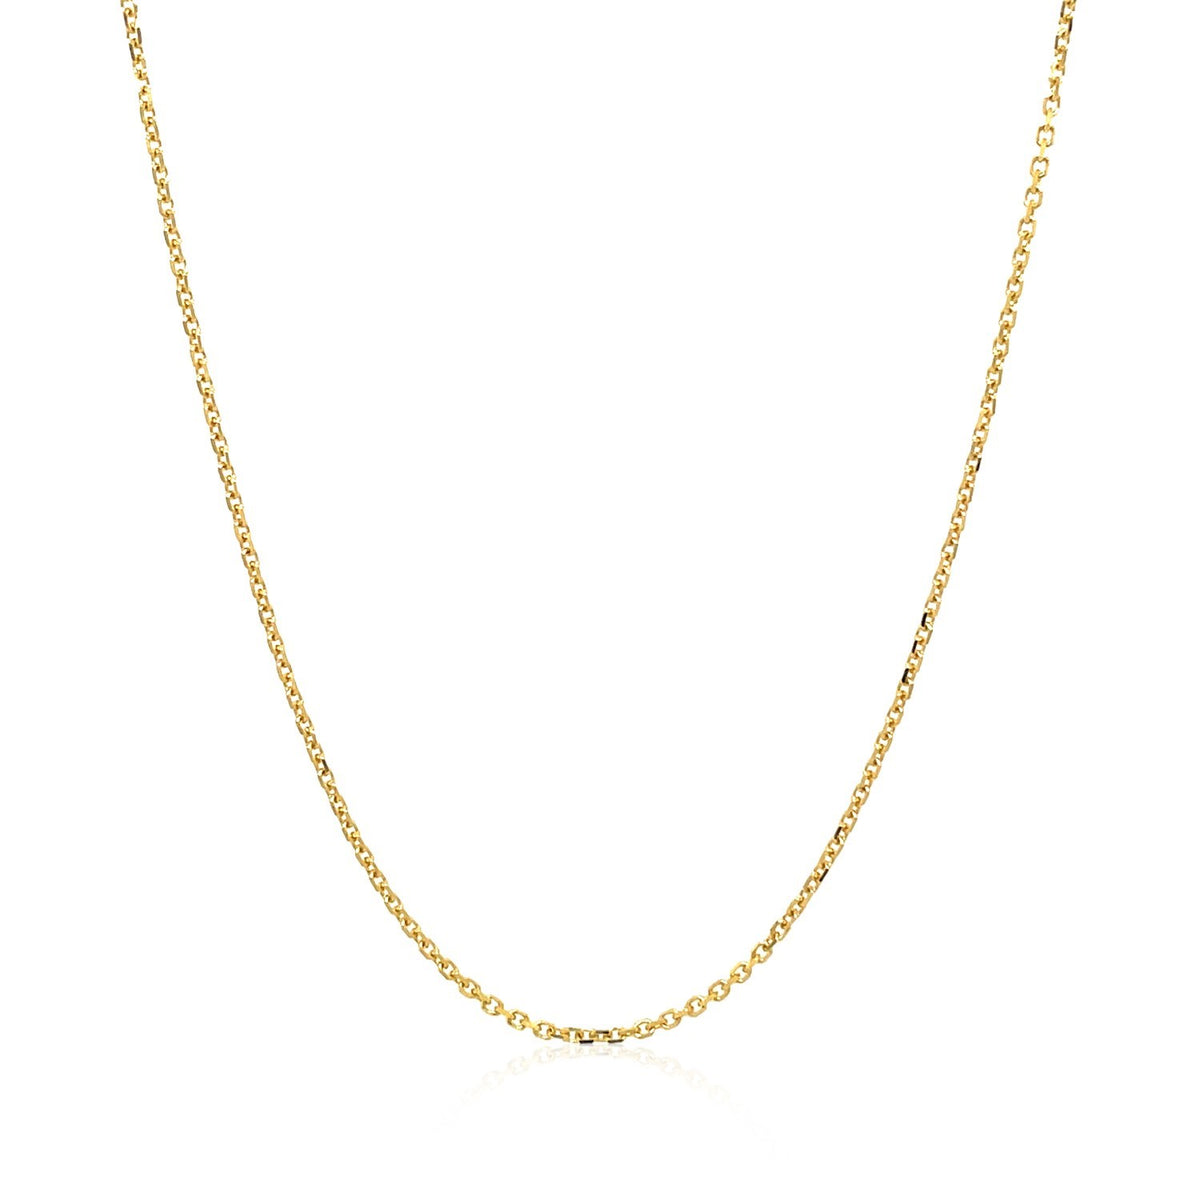 Diamond Cut Cable Link Chain - 18k Yellow Gold 1.10mm